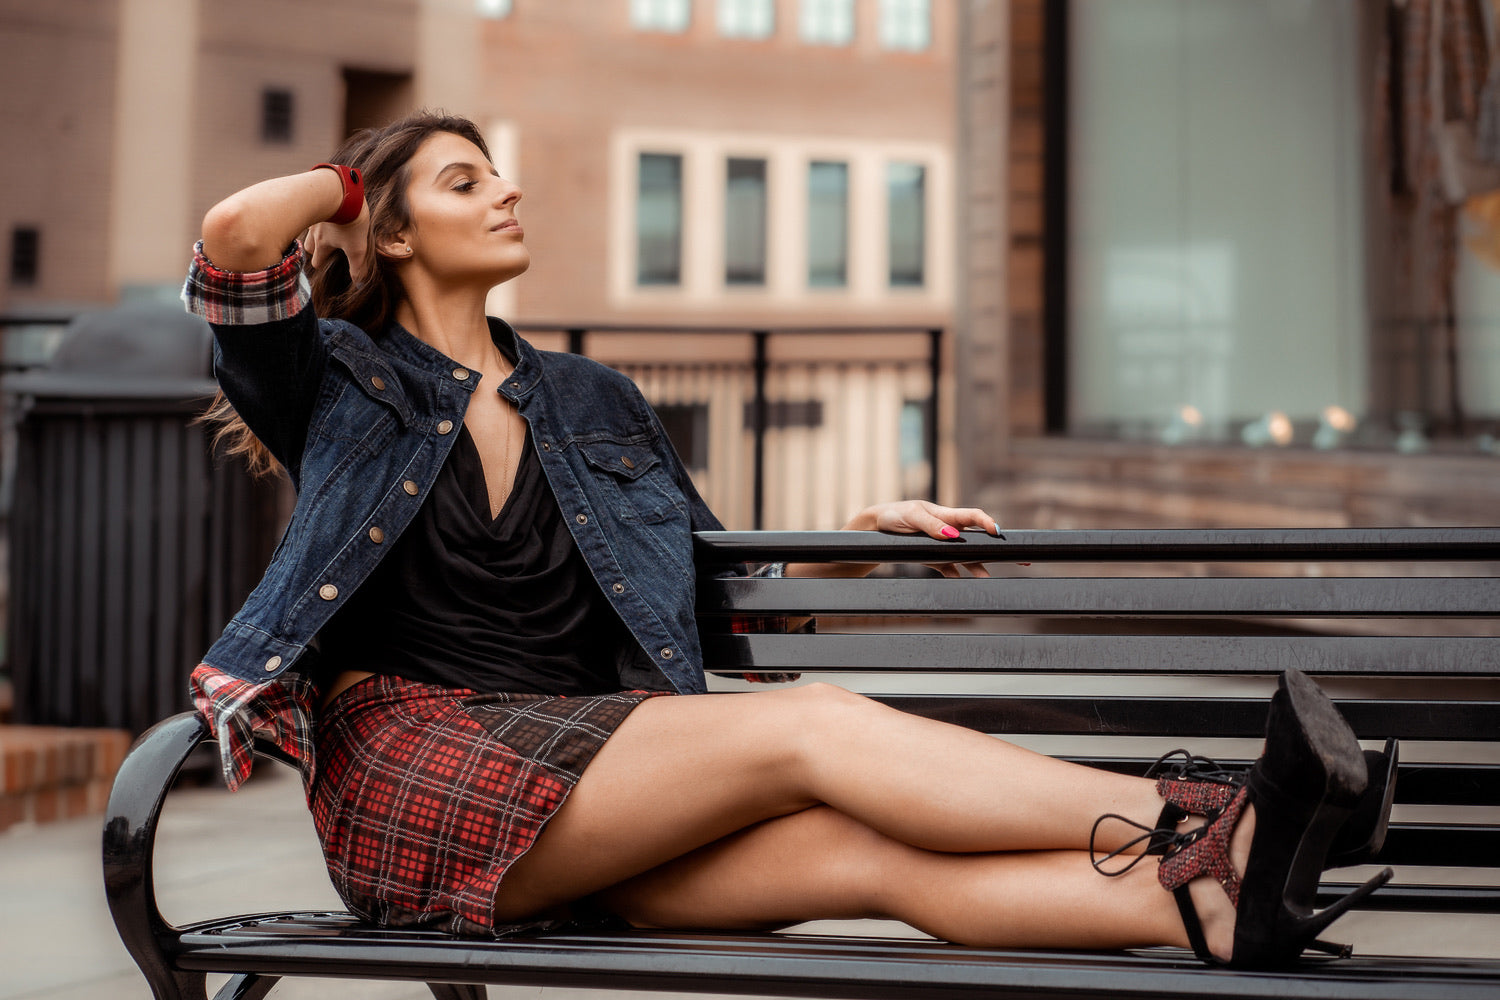 Neapolitan  Red and Brown Plaid Skirt